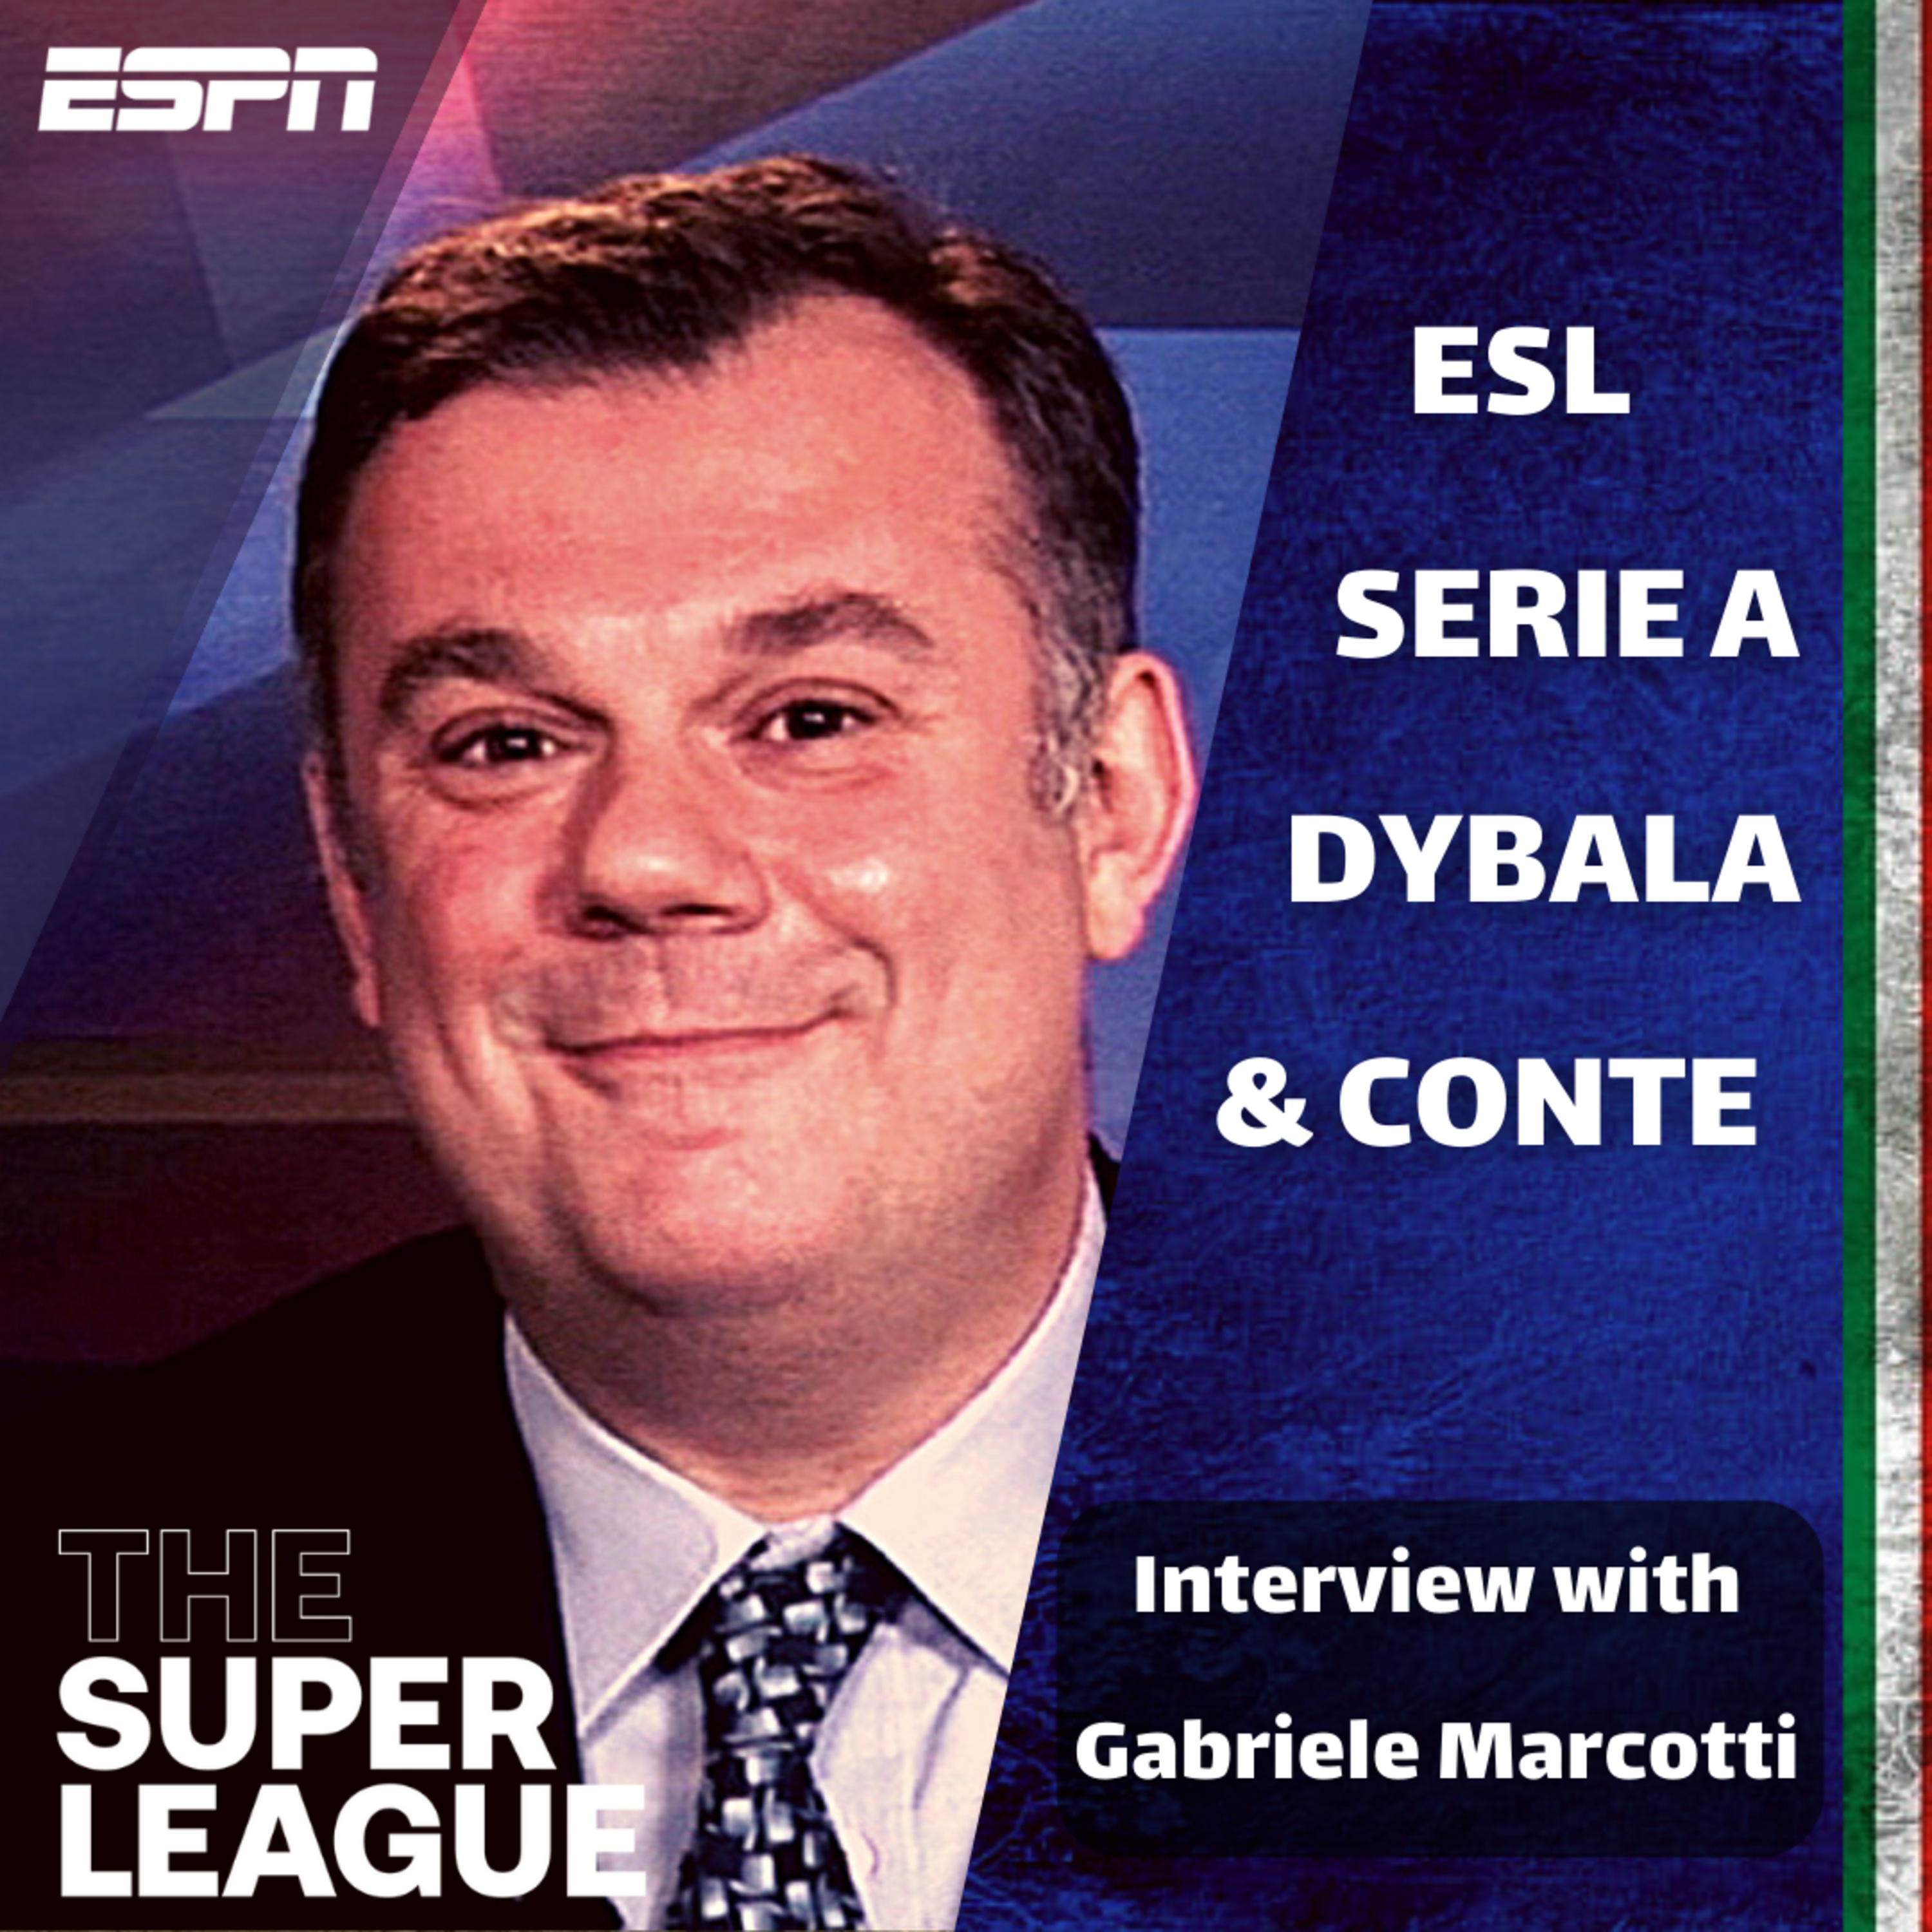 Special Interview Episode with Gabriele Marcotti from ESPN